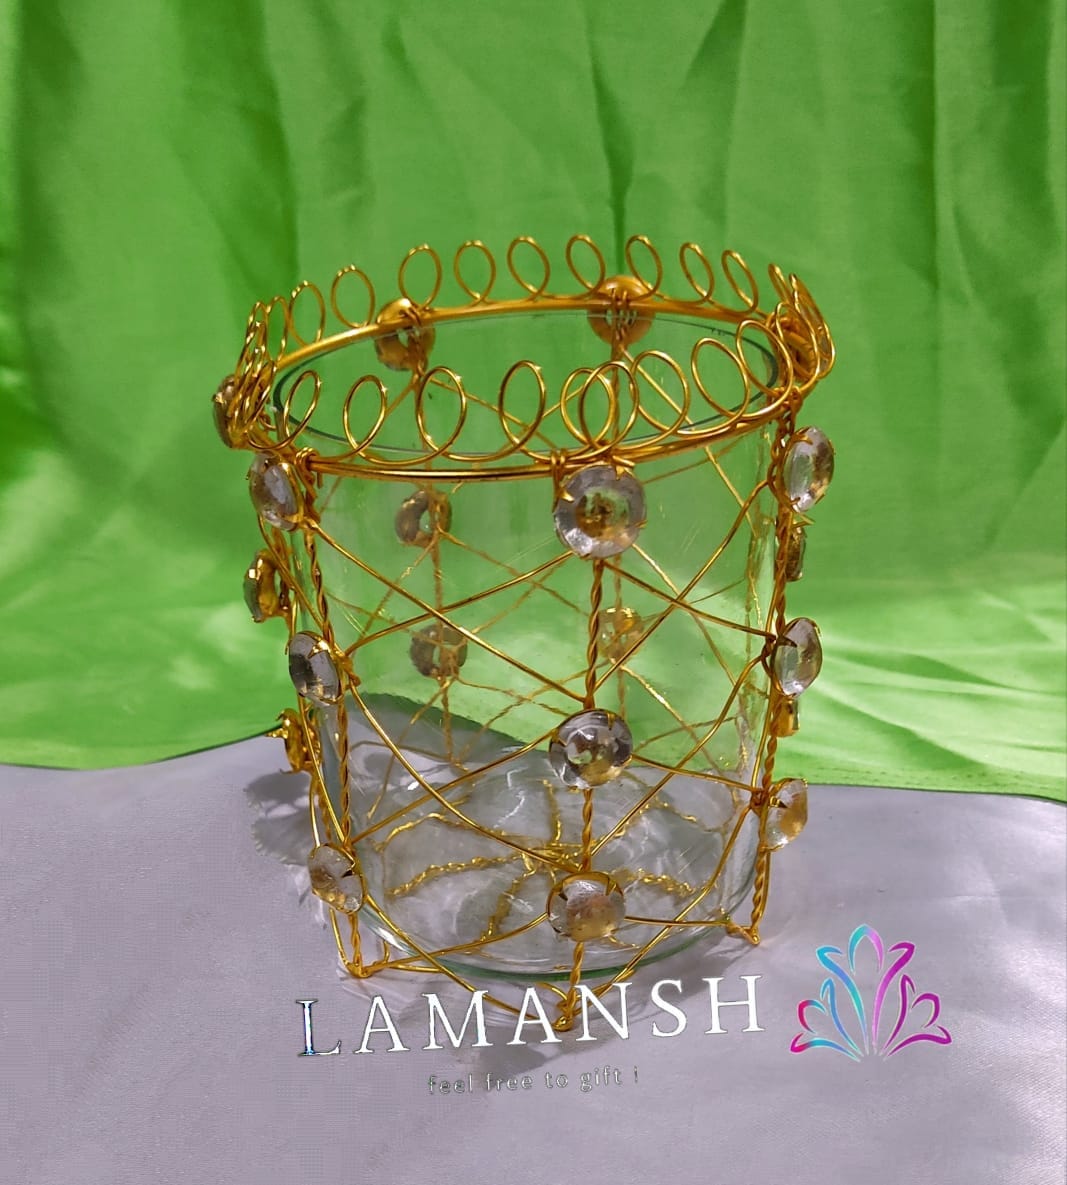 LAMANSH Gold / Metal & Glass / 1 LAMANSH® (Pack of 1) Tealight Candle Holder Glass Crystal Tea Light Candle Holders Votive Stand for Home Indoor Outdoor Table Top Centerpiece Decoration